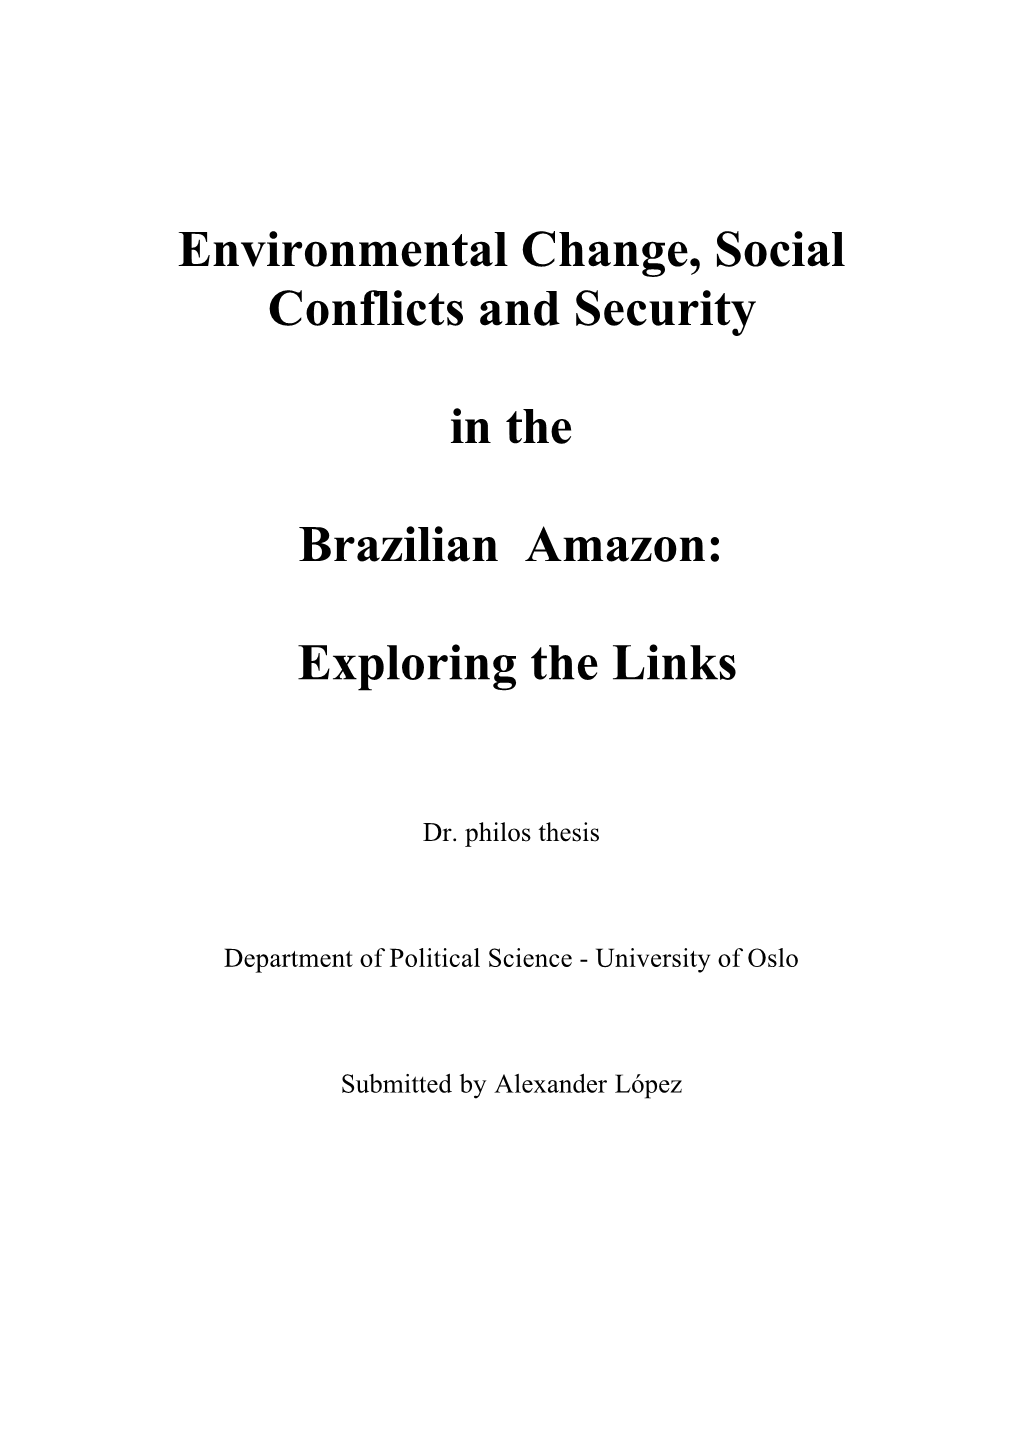 Environmental Change, Social Conflicts and Security in the Brazilian Amazon